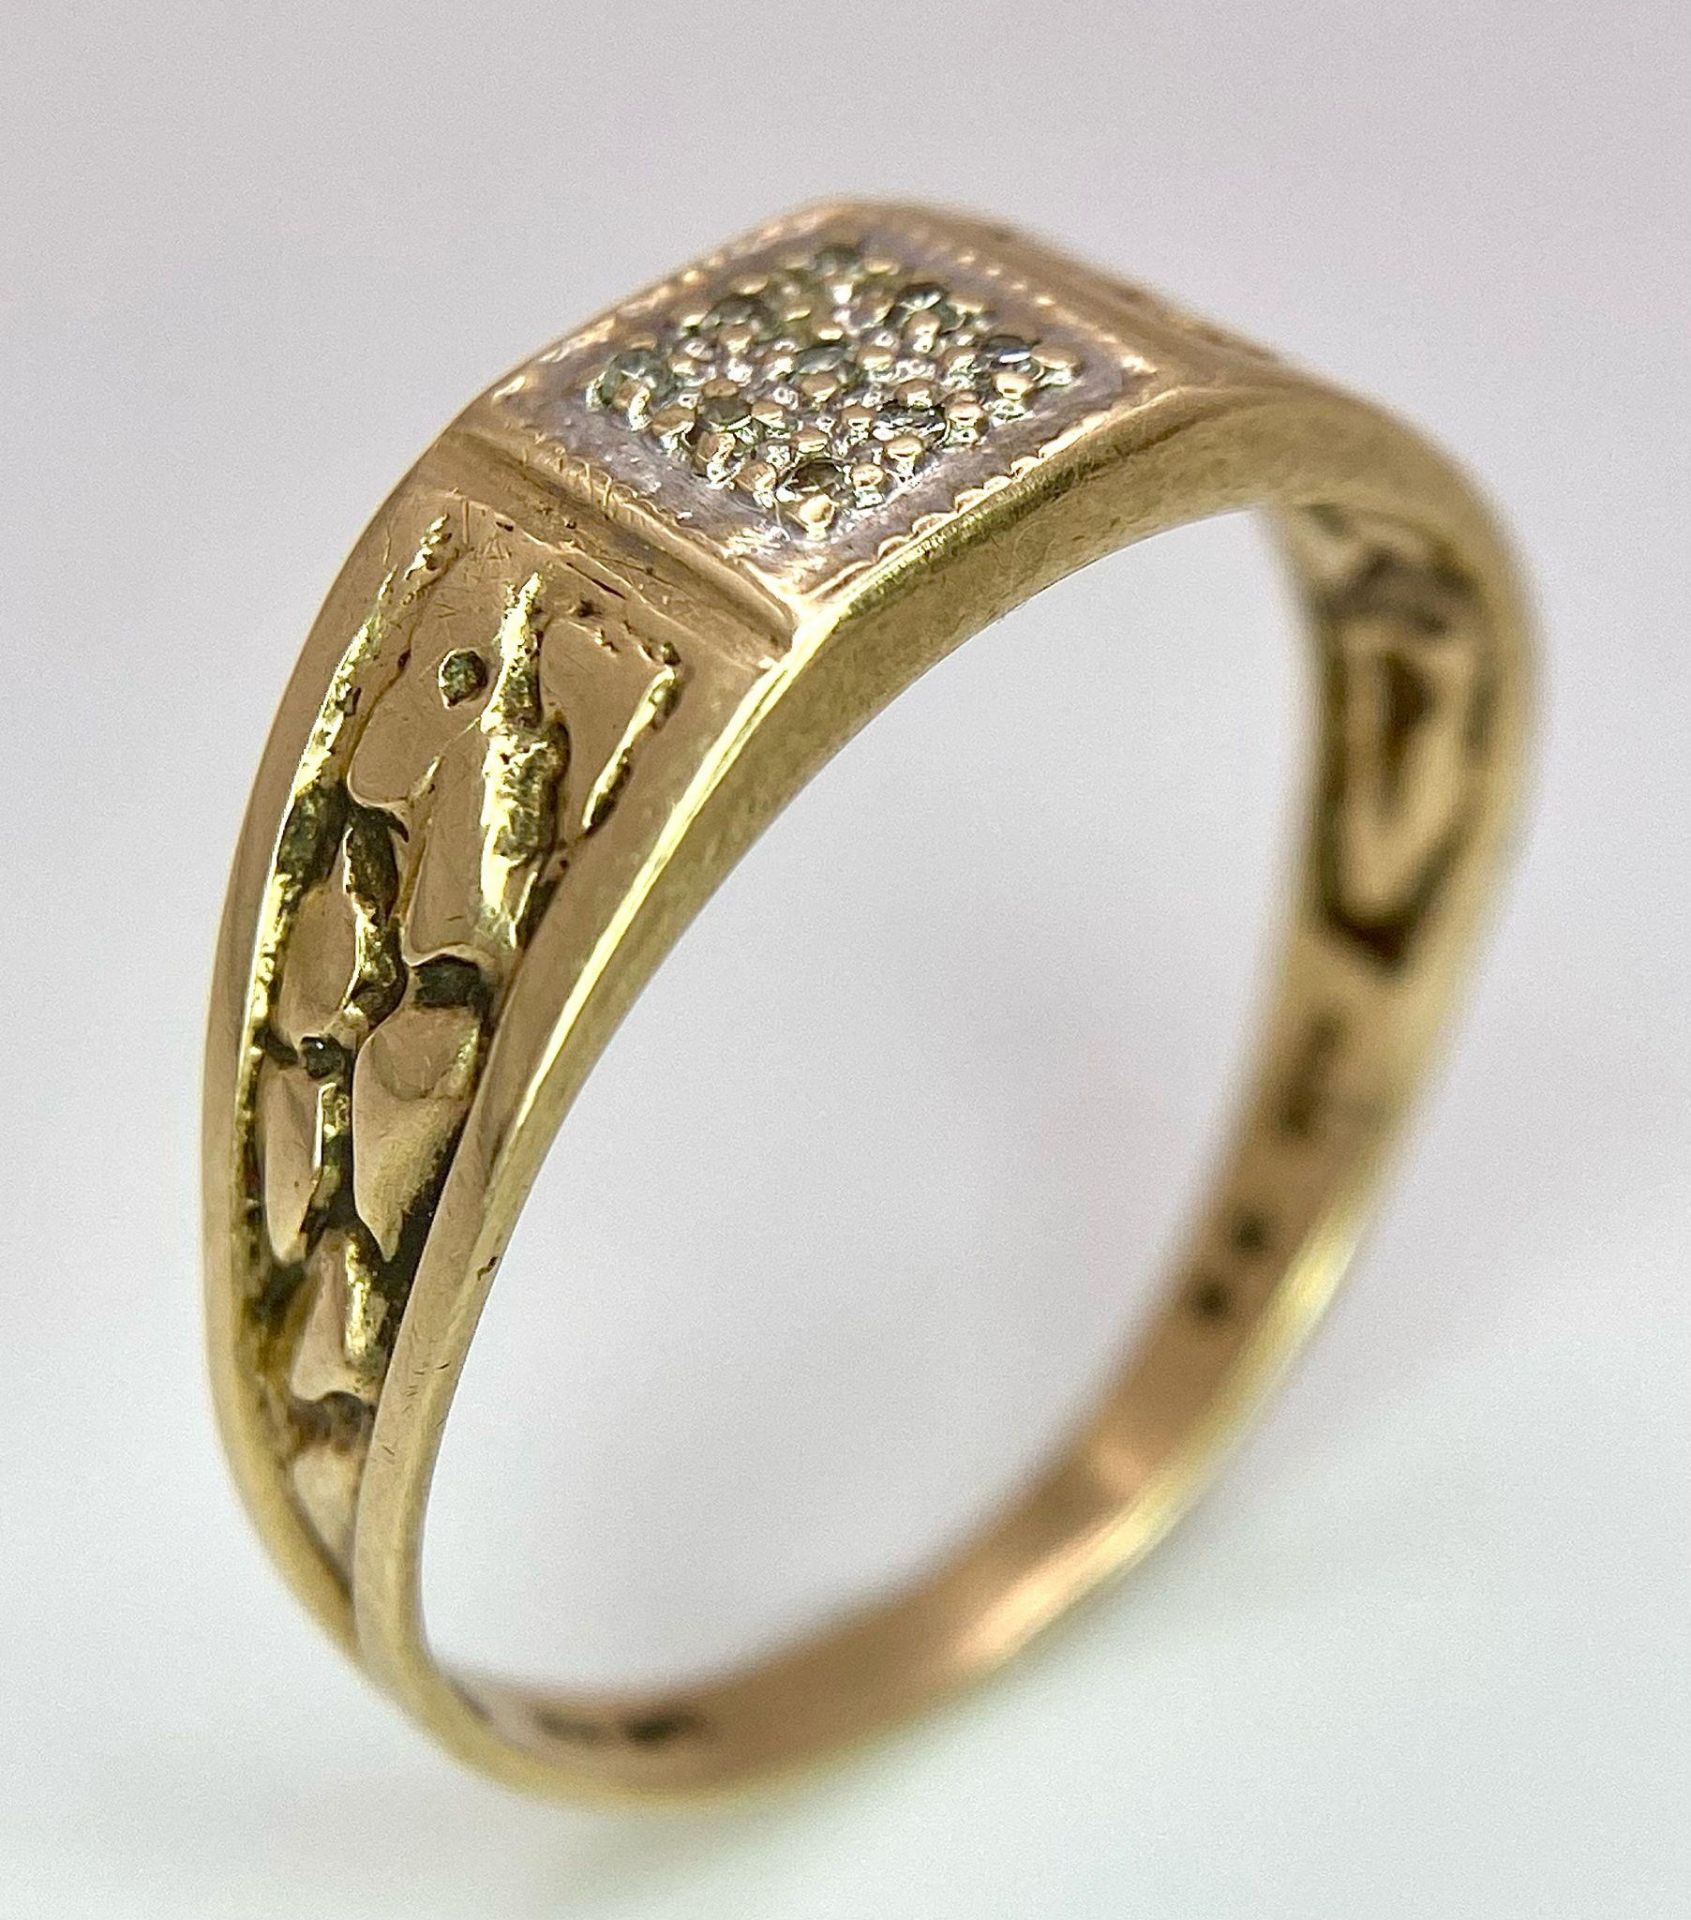 A VINTAGE GENTS 9K YELLOW GOLD DIAMOND BAND RING WITH PATTERNED SHOULDERS - 0.01CT DIAMOND - 2G - Image 2 of 6